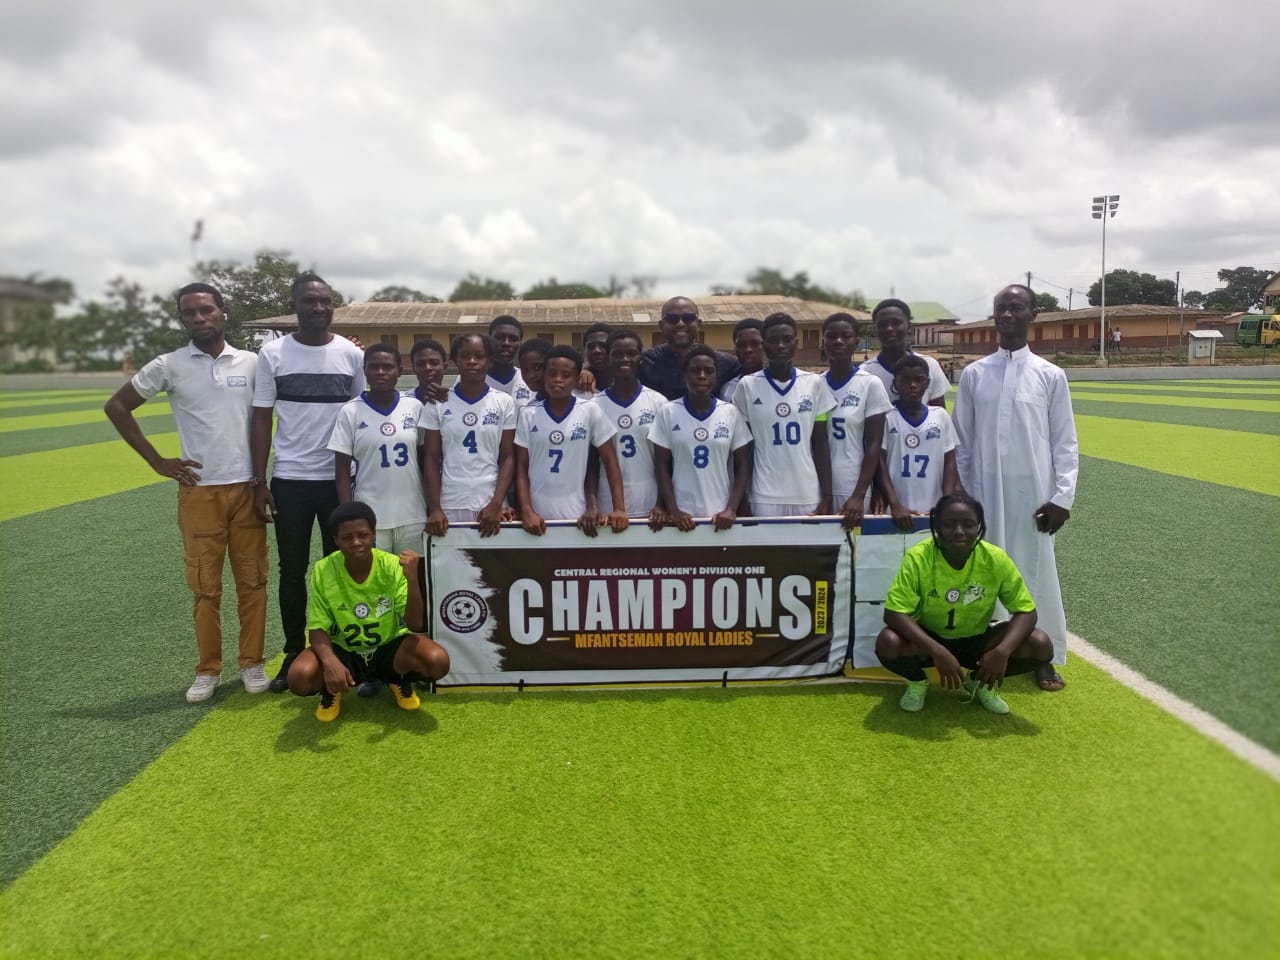 Mfantseman Royal Ladies crowned Central Regional Women's Division One Champions